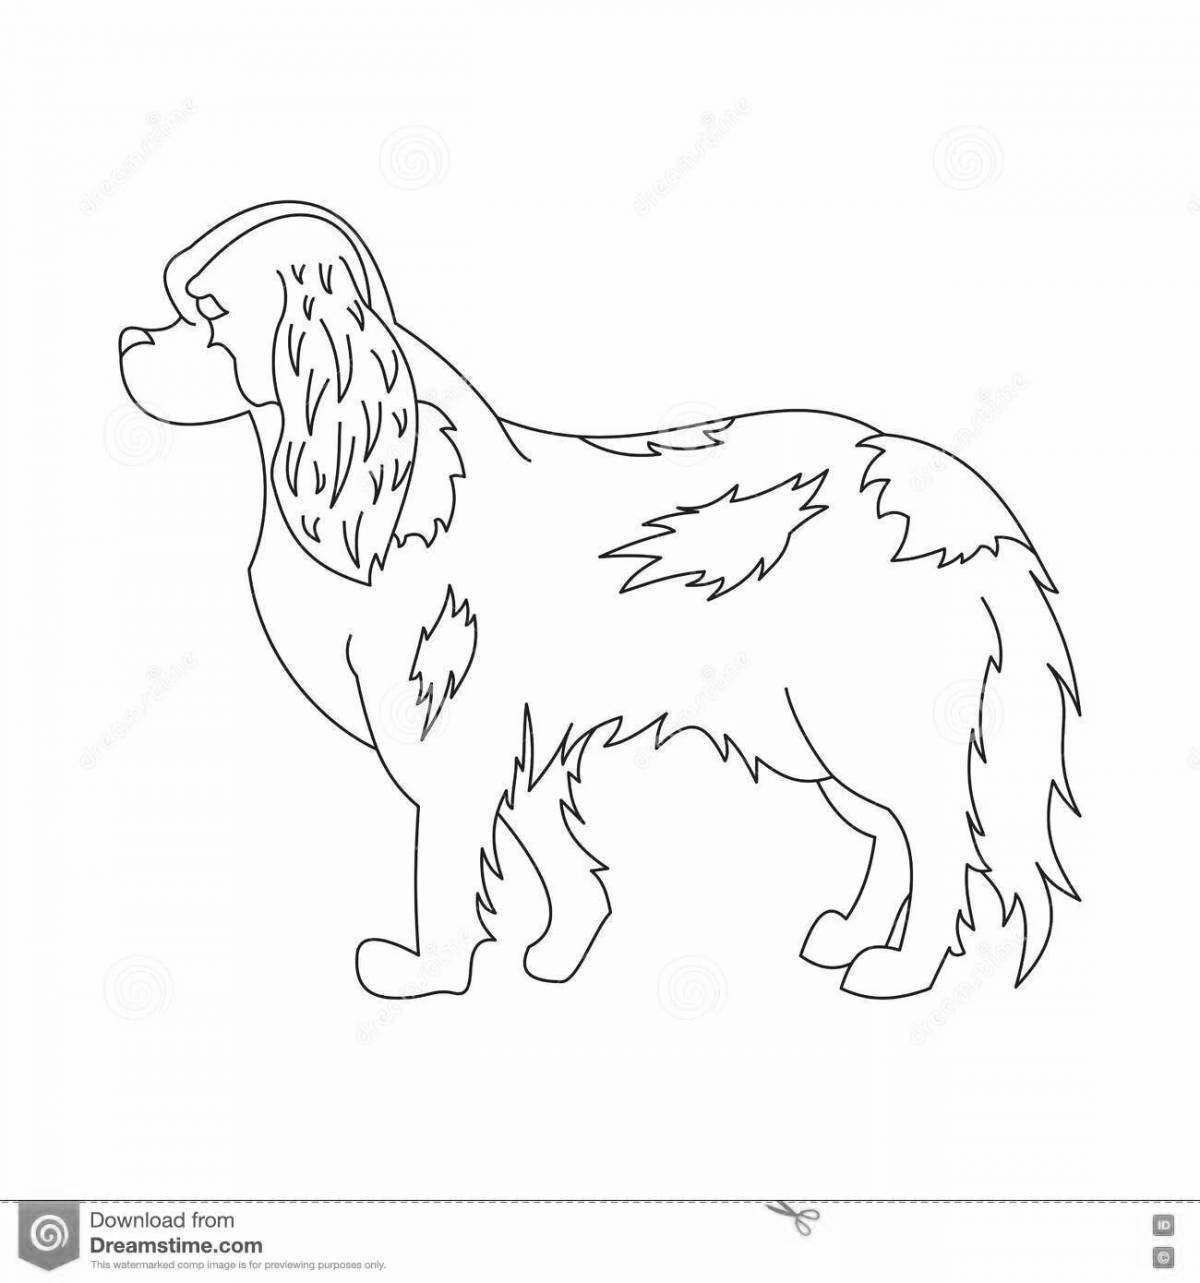 Wiggly spaniel coloring page